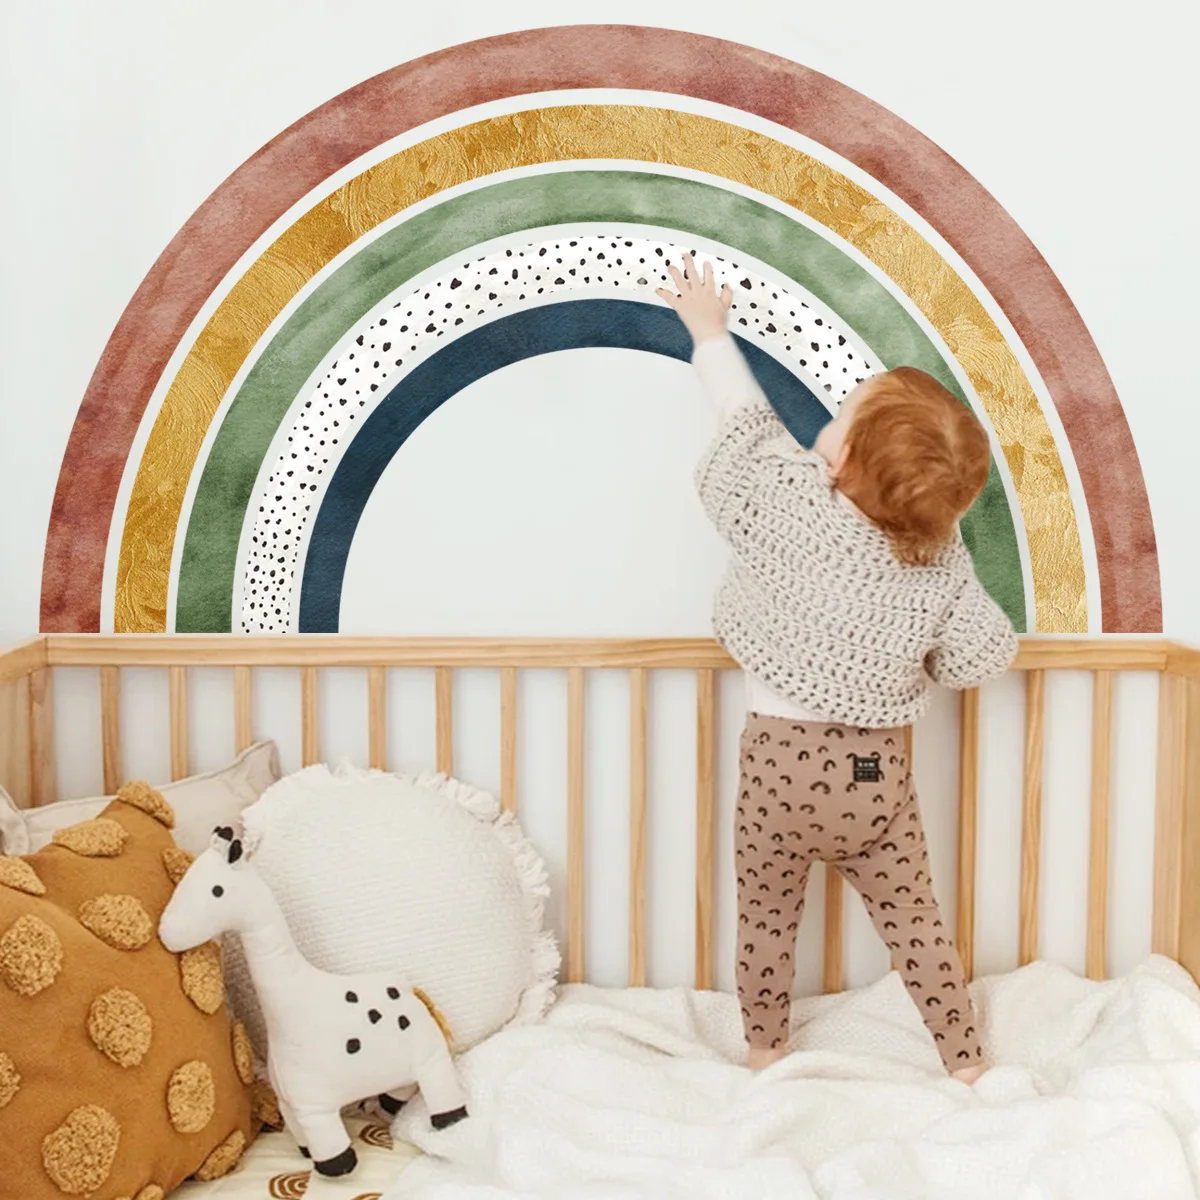 39.5*170cm Large Rainbow Wall Stickers Living Room Background Wall Children's Room Decorative Wall Stickers Wallpaper Bm4052